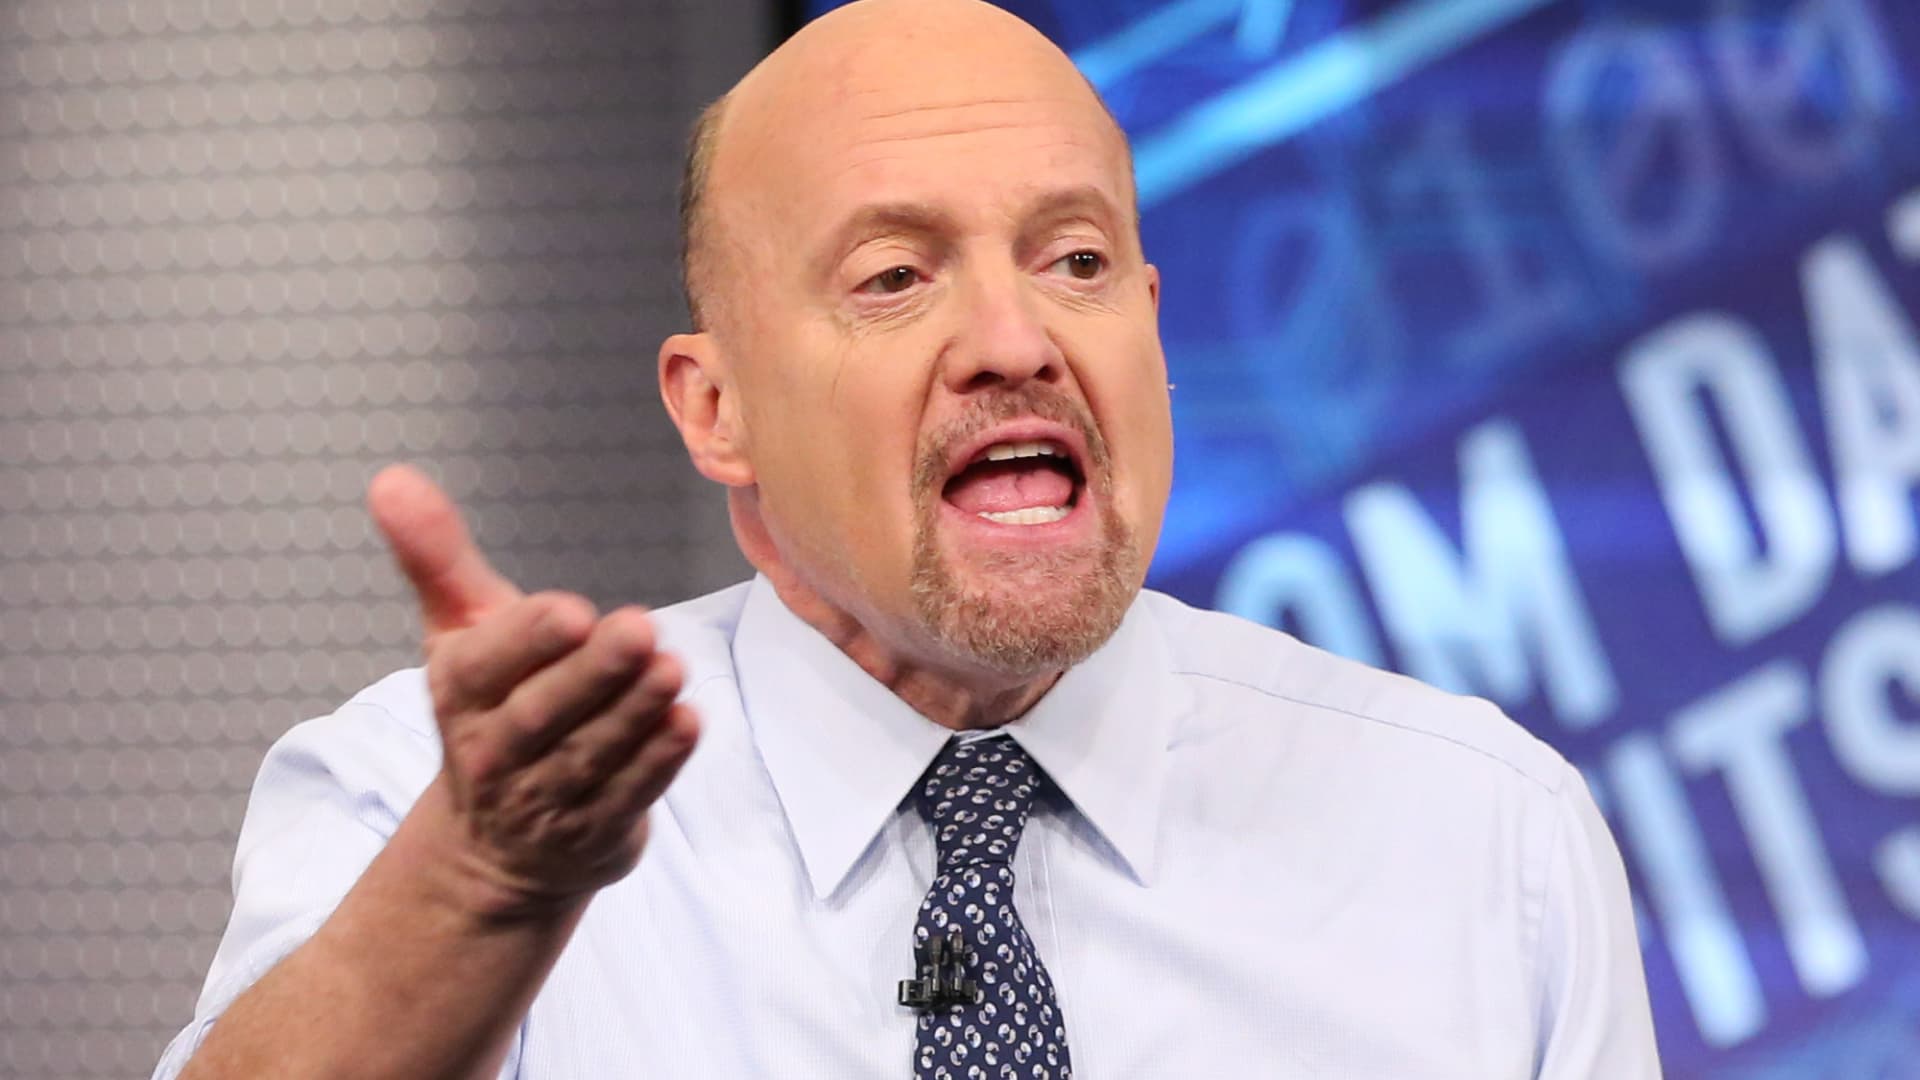 As debt ceiling talks flounder, Cramer says lawmakers’ actions will mark you